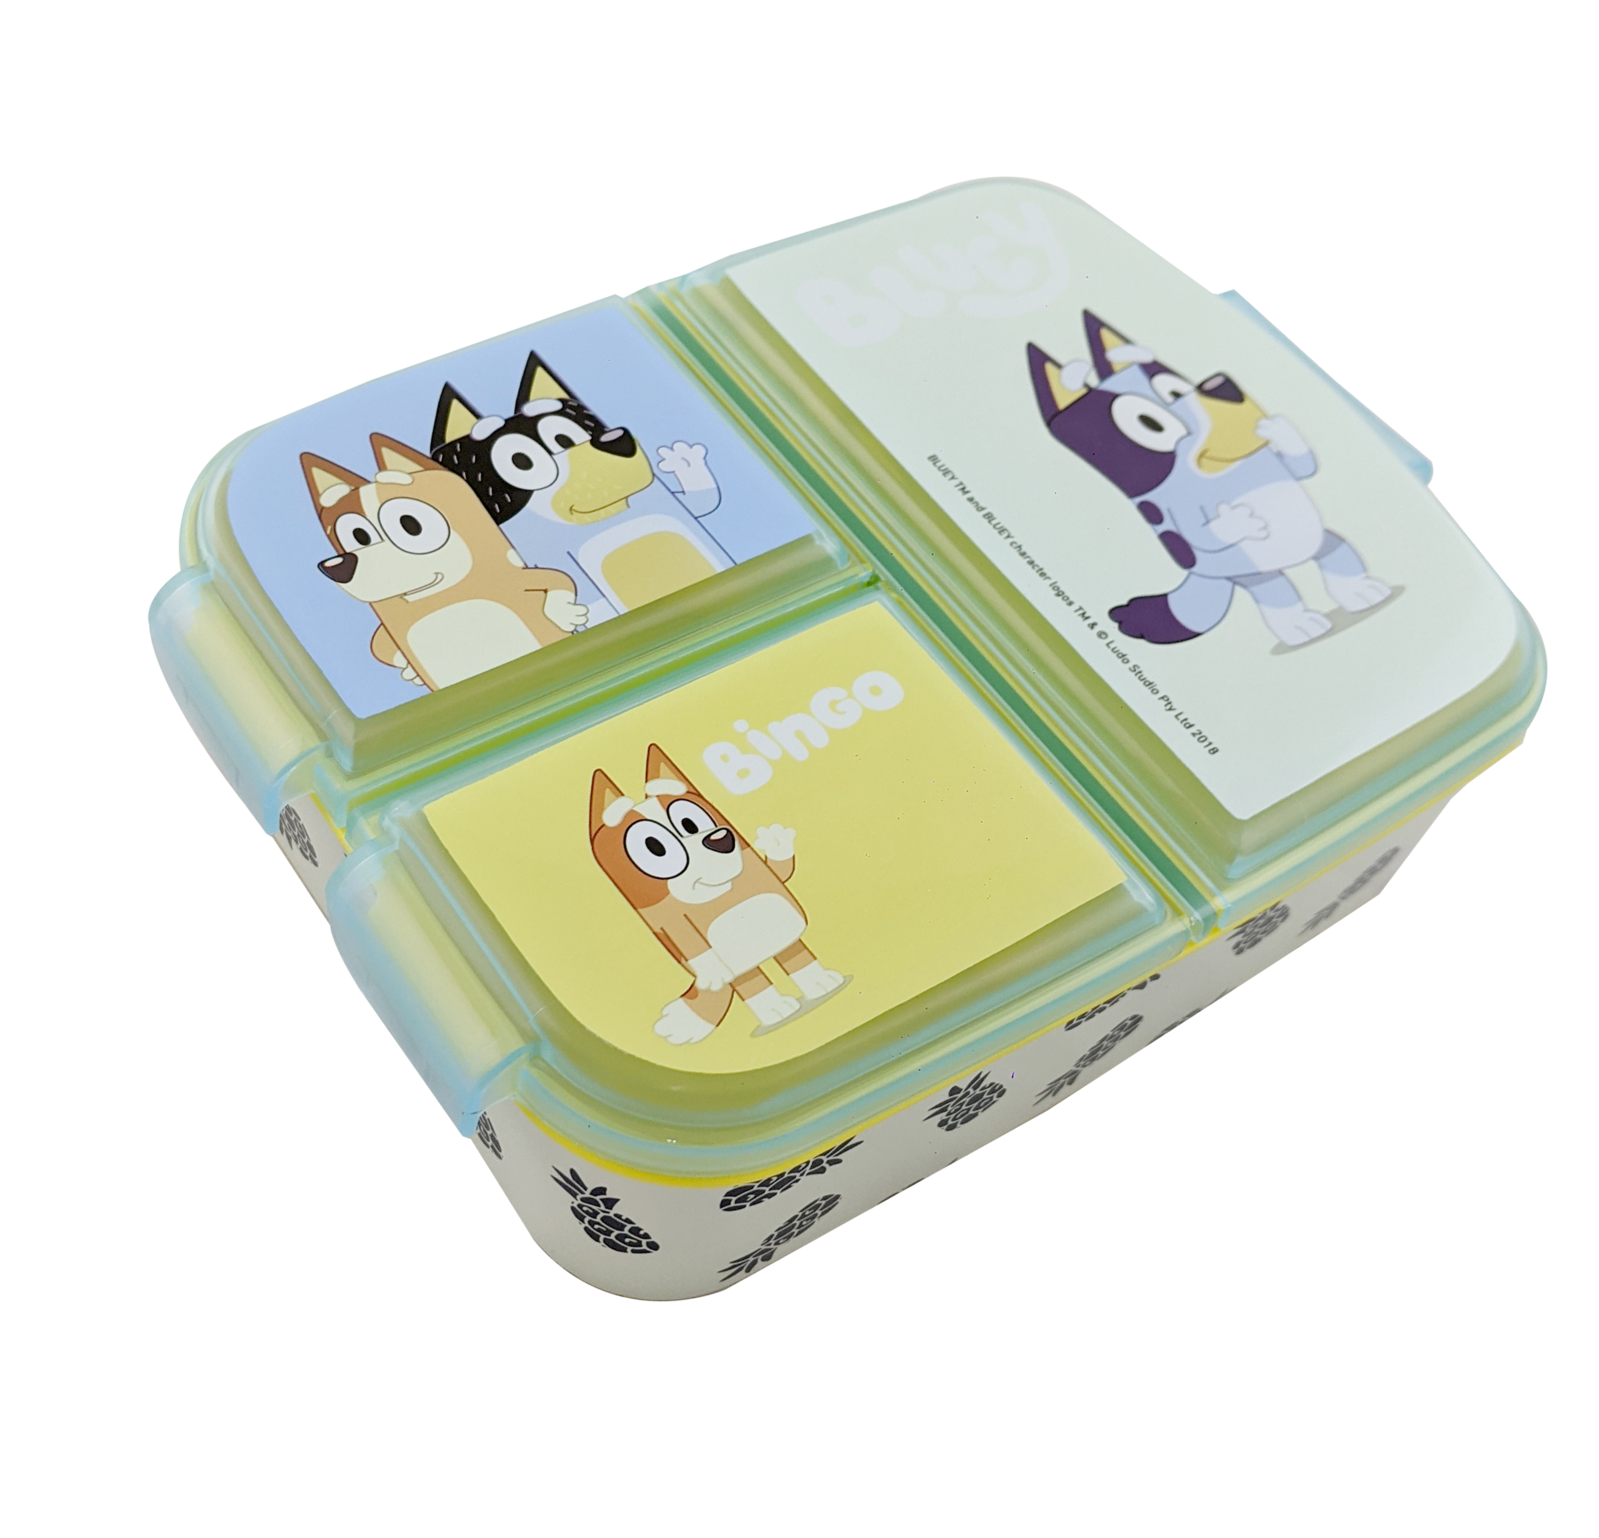 Buy Licensed Bento Lunch Box - Bluey Online, Worldwide Delivery, Australian Food Shop